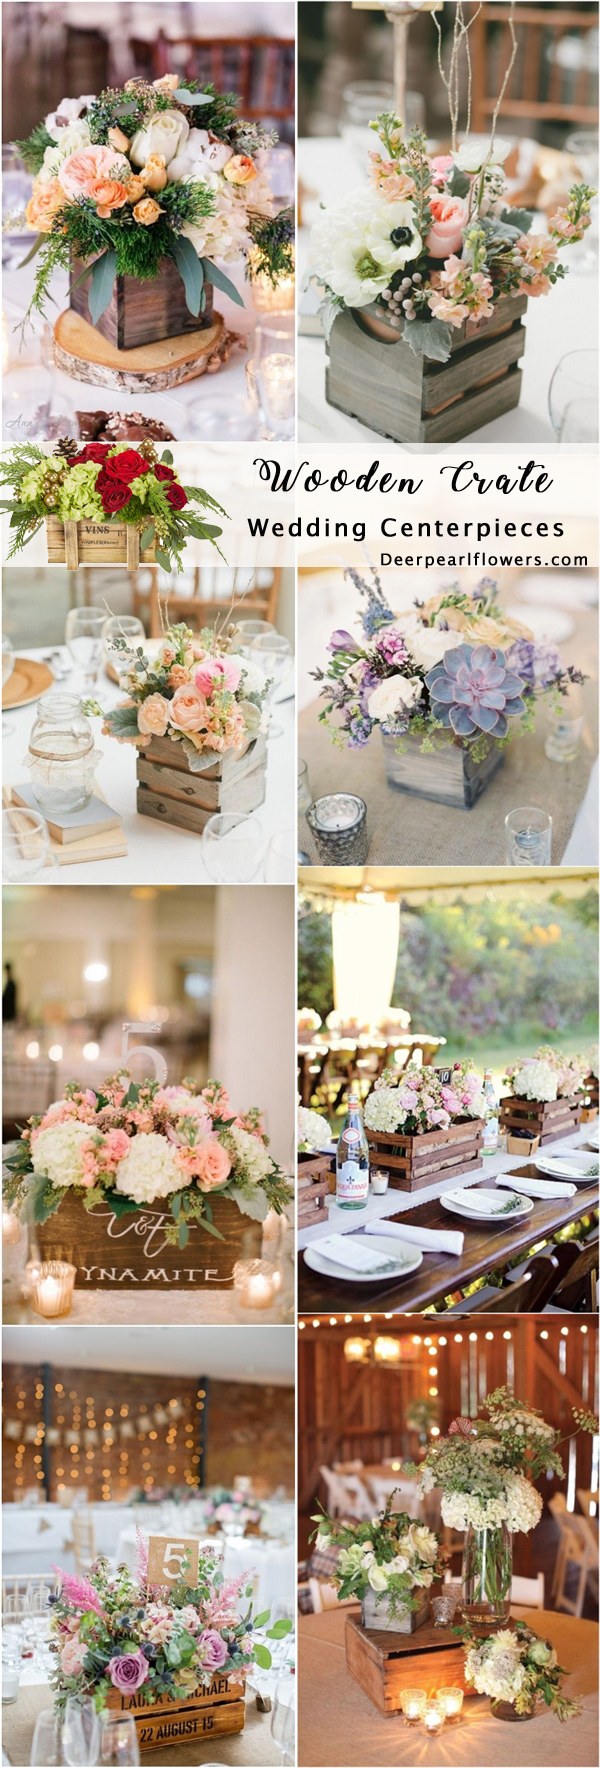 Rustic country wooden crate wedding centerpieces